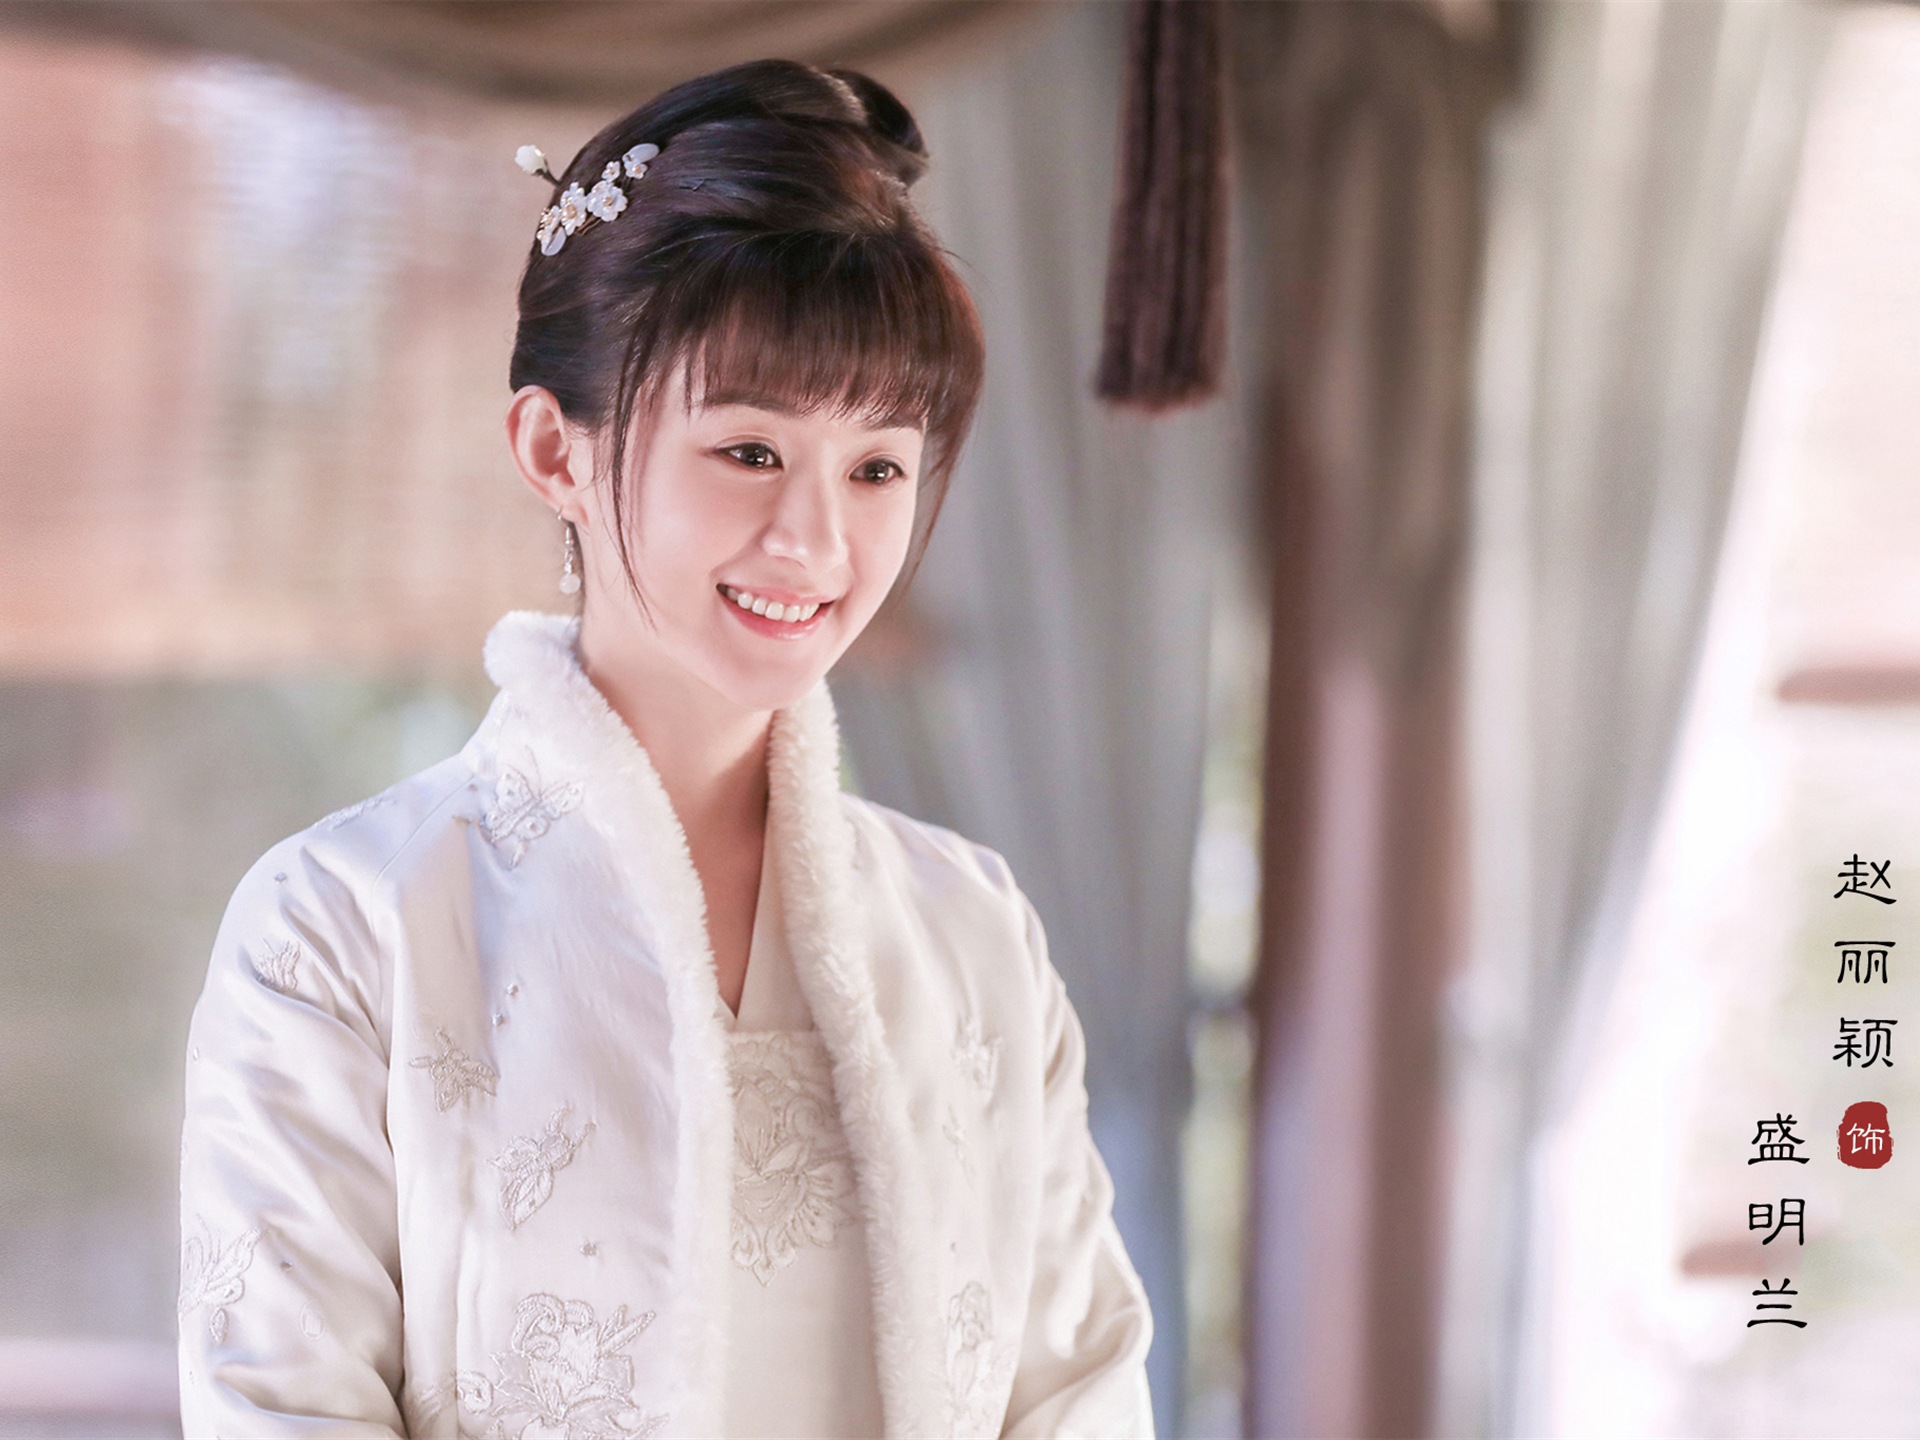 The Story Of MingLan, TV series HD wallpapers #28 - 1920x1440